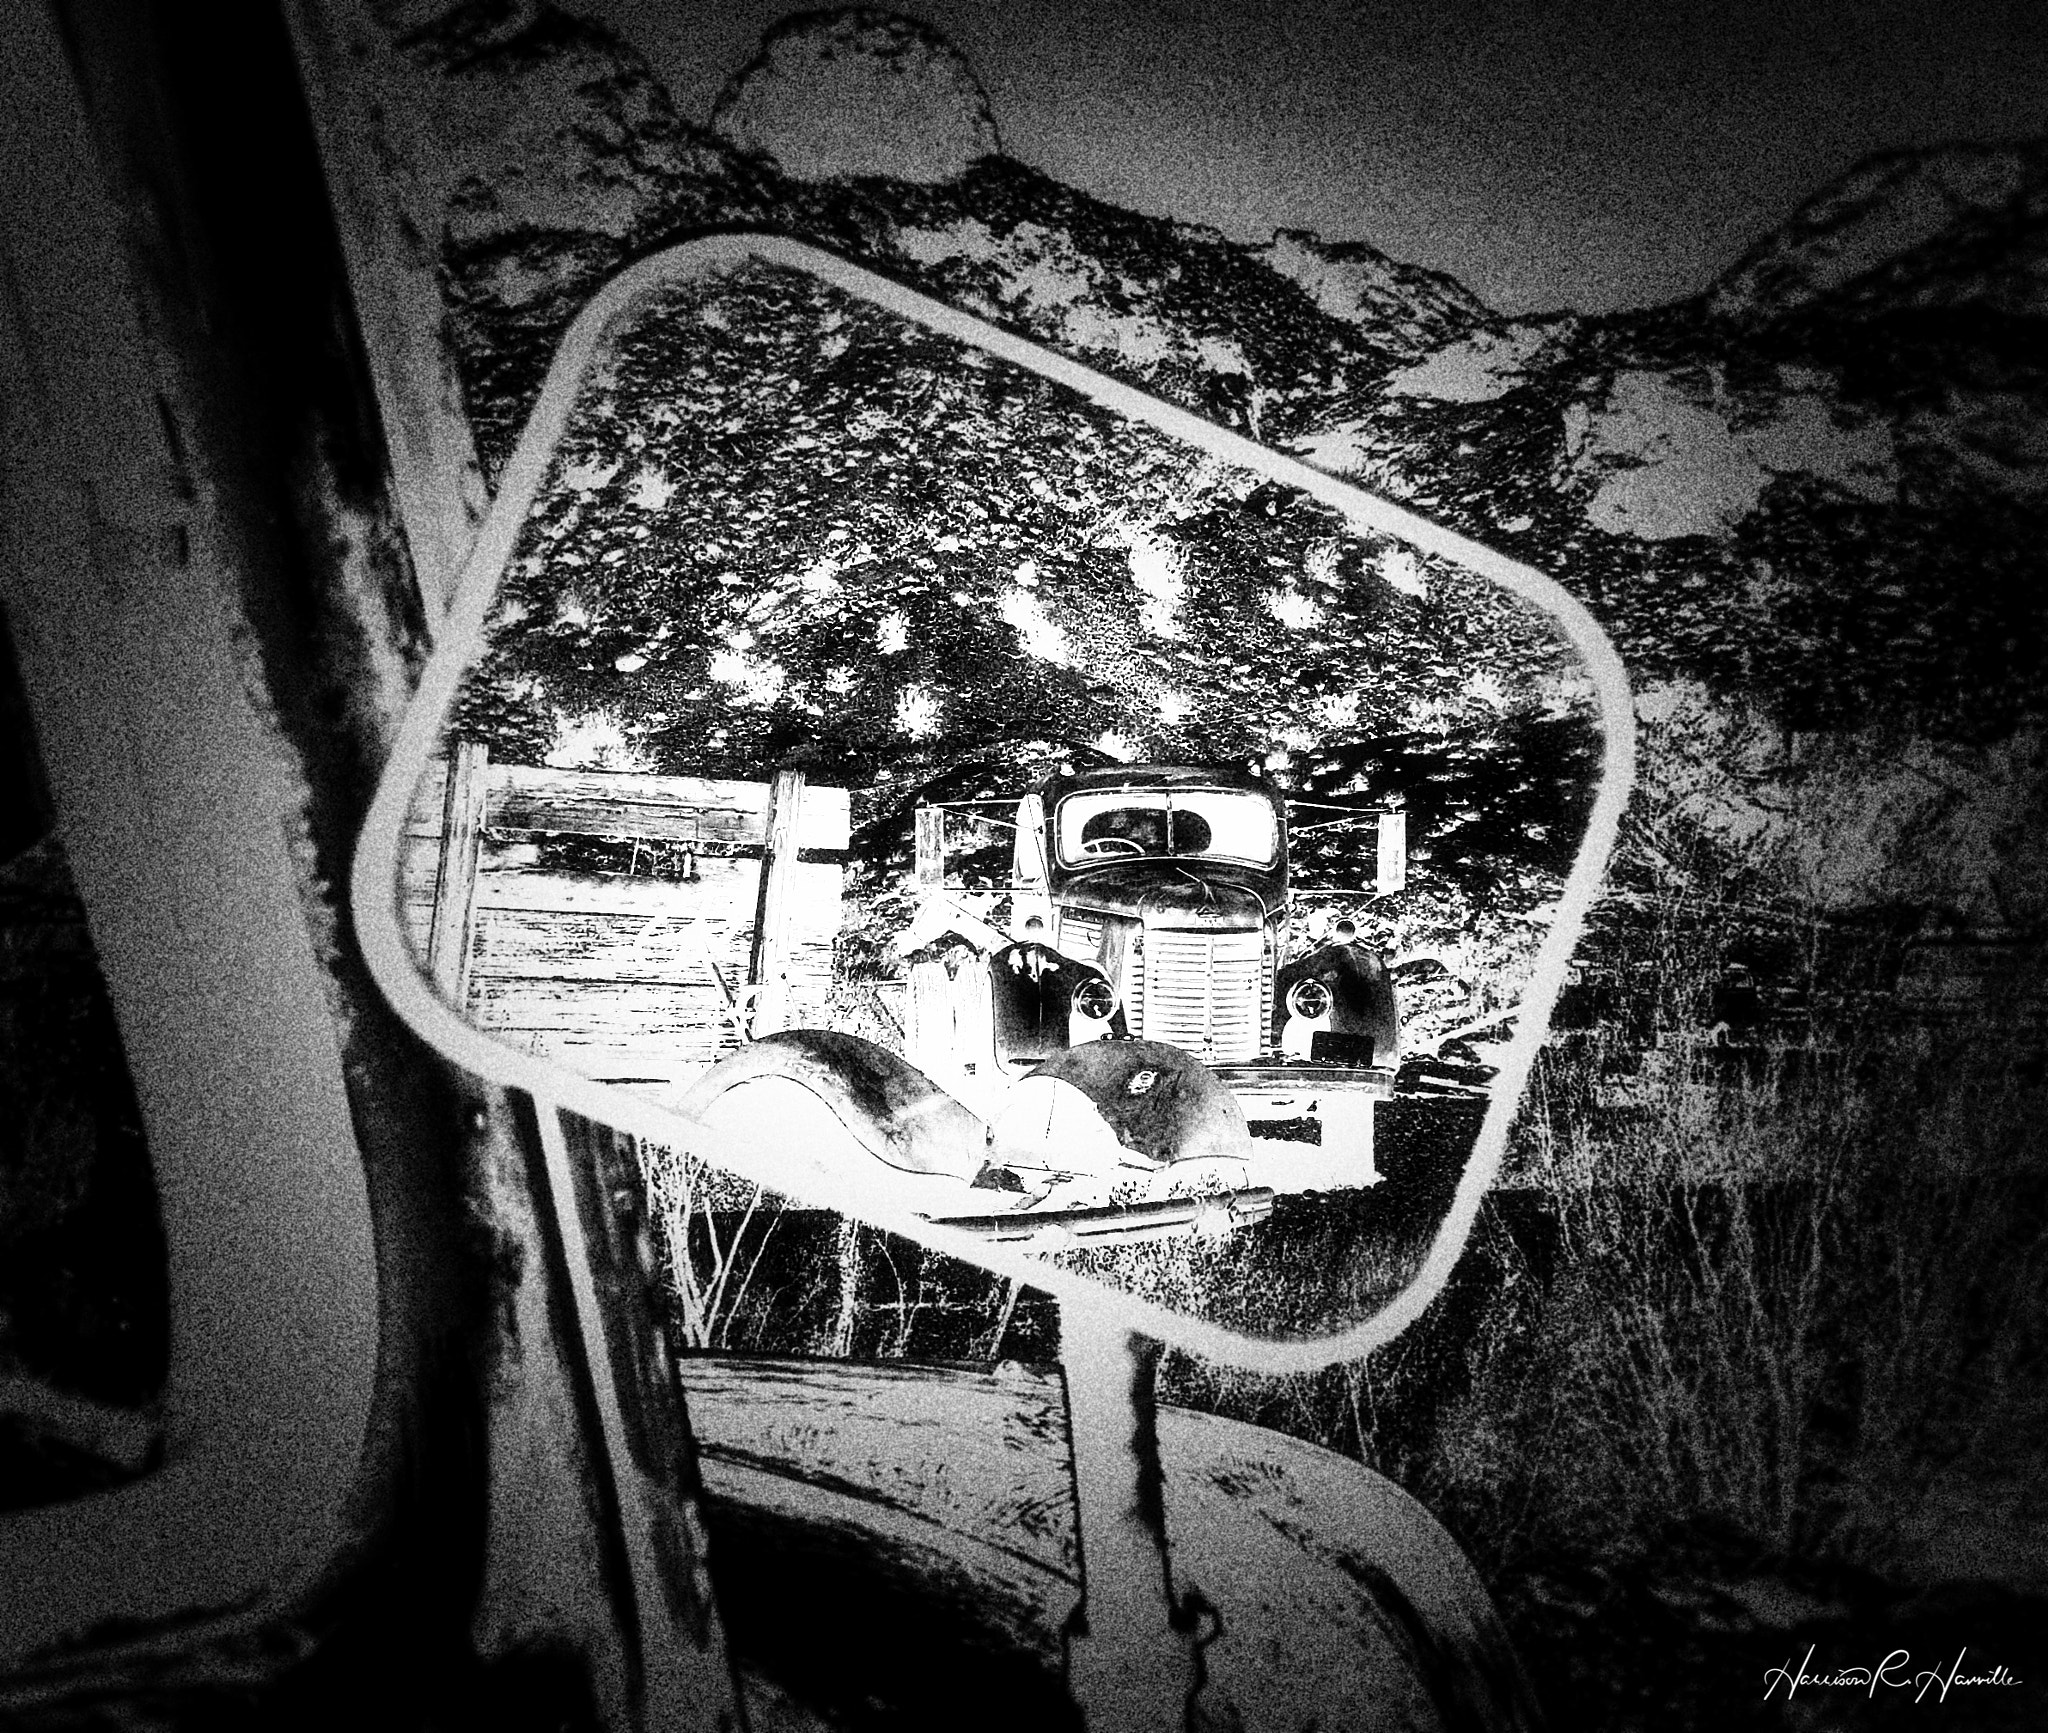 Hasselblad Lunar sample photo. In the mirror photography